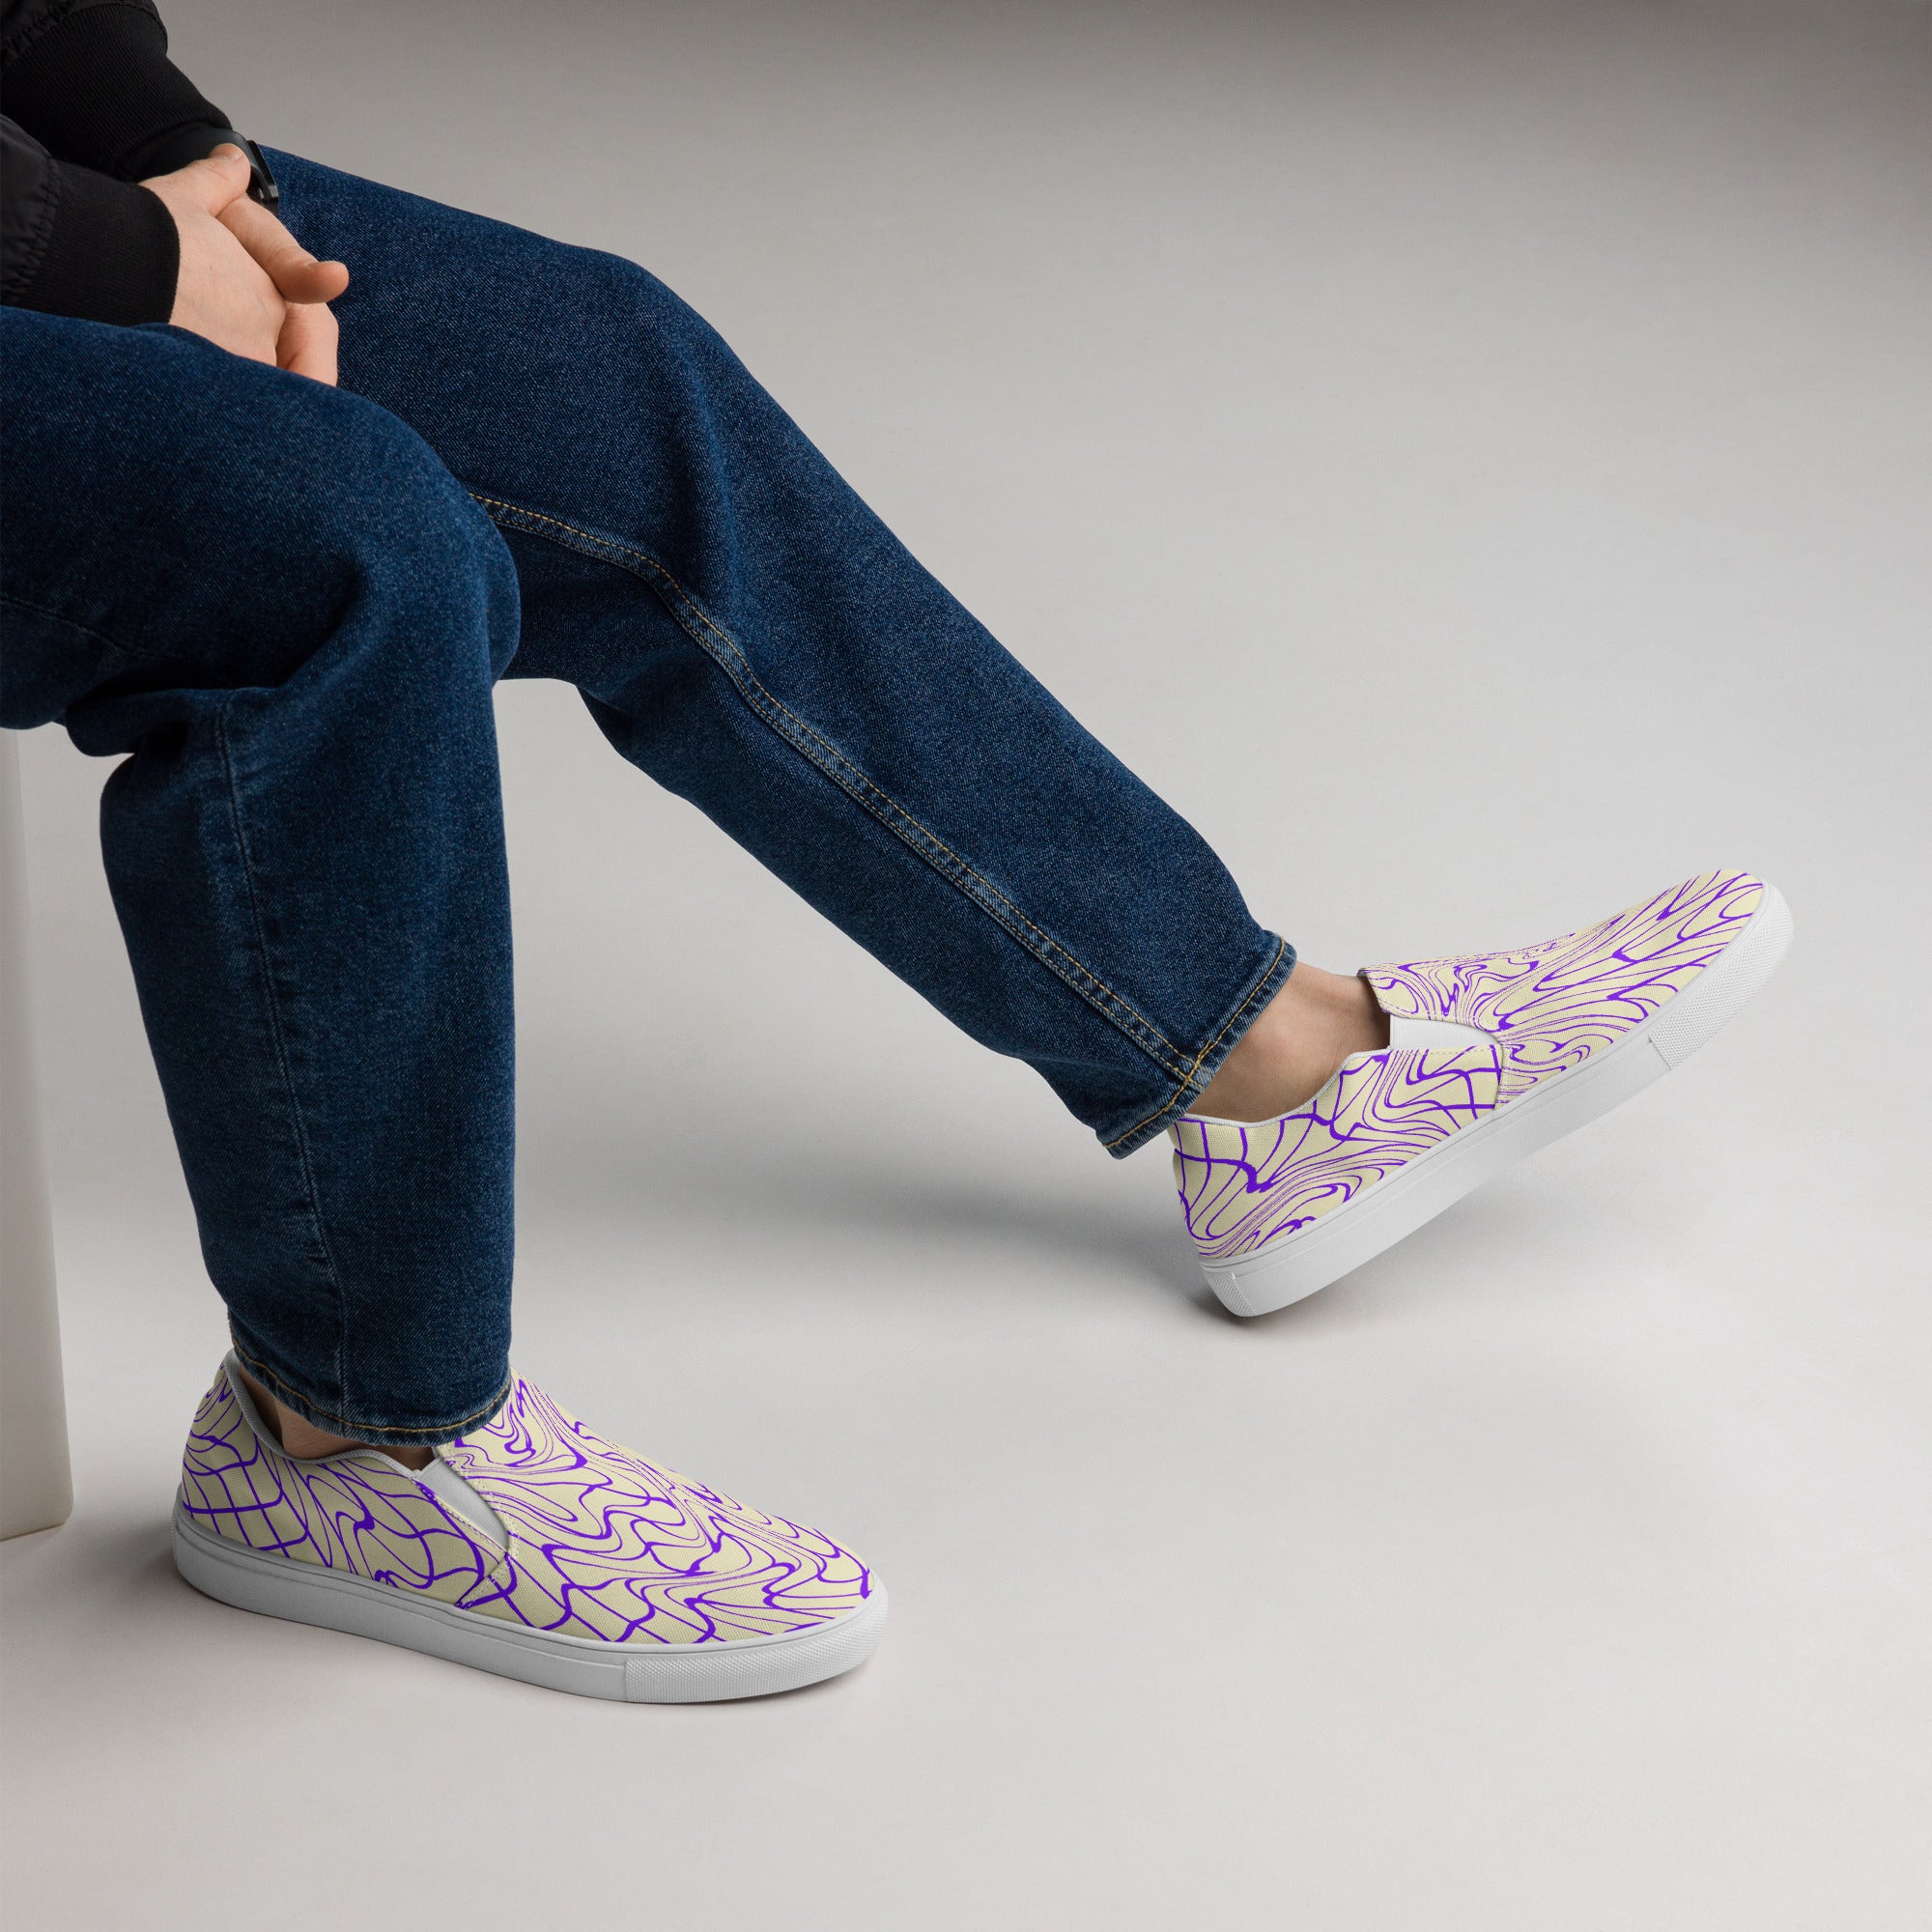 Slip-on canvas shoes -Author's Creativity Funding Product